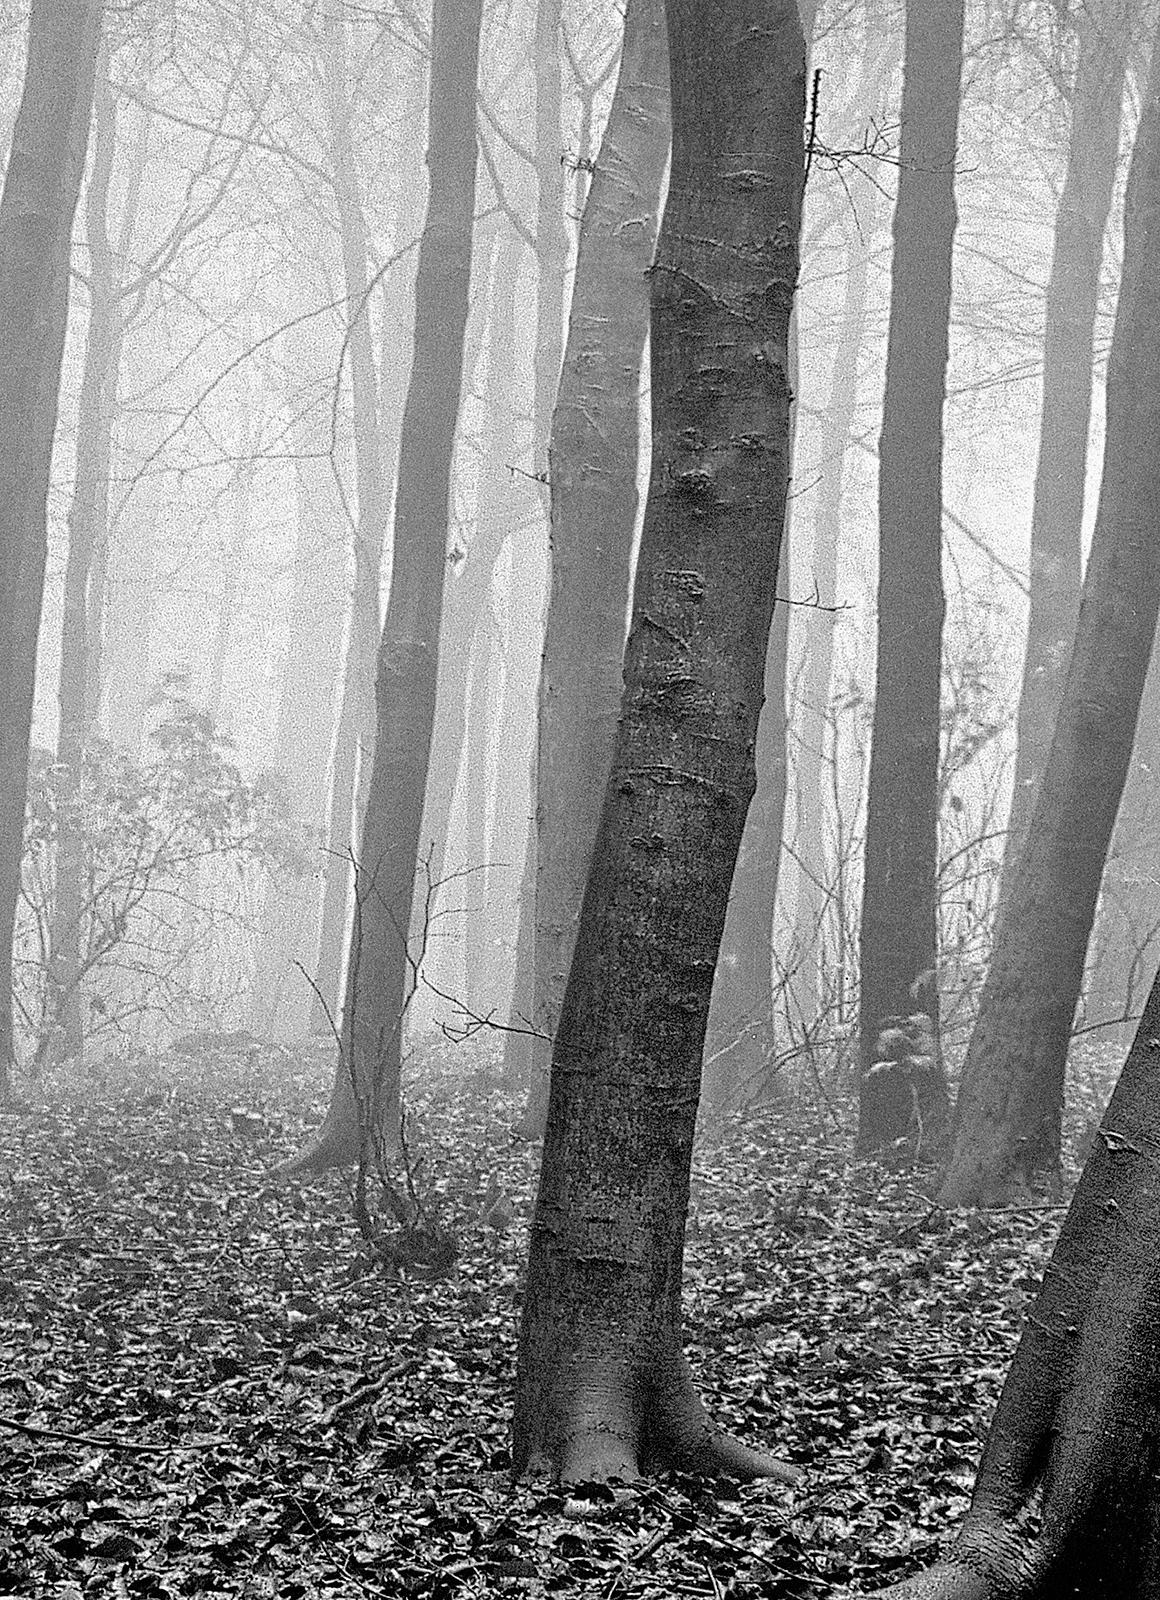 Wood- Signed limited edition nature print, Black white, Landscape, Contemporary - Photograph by Ian Sanderson